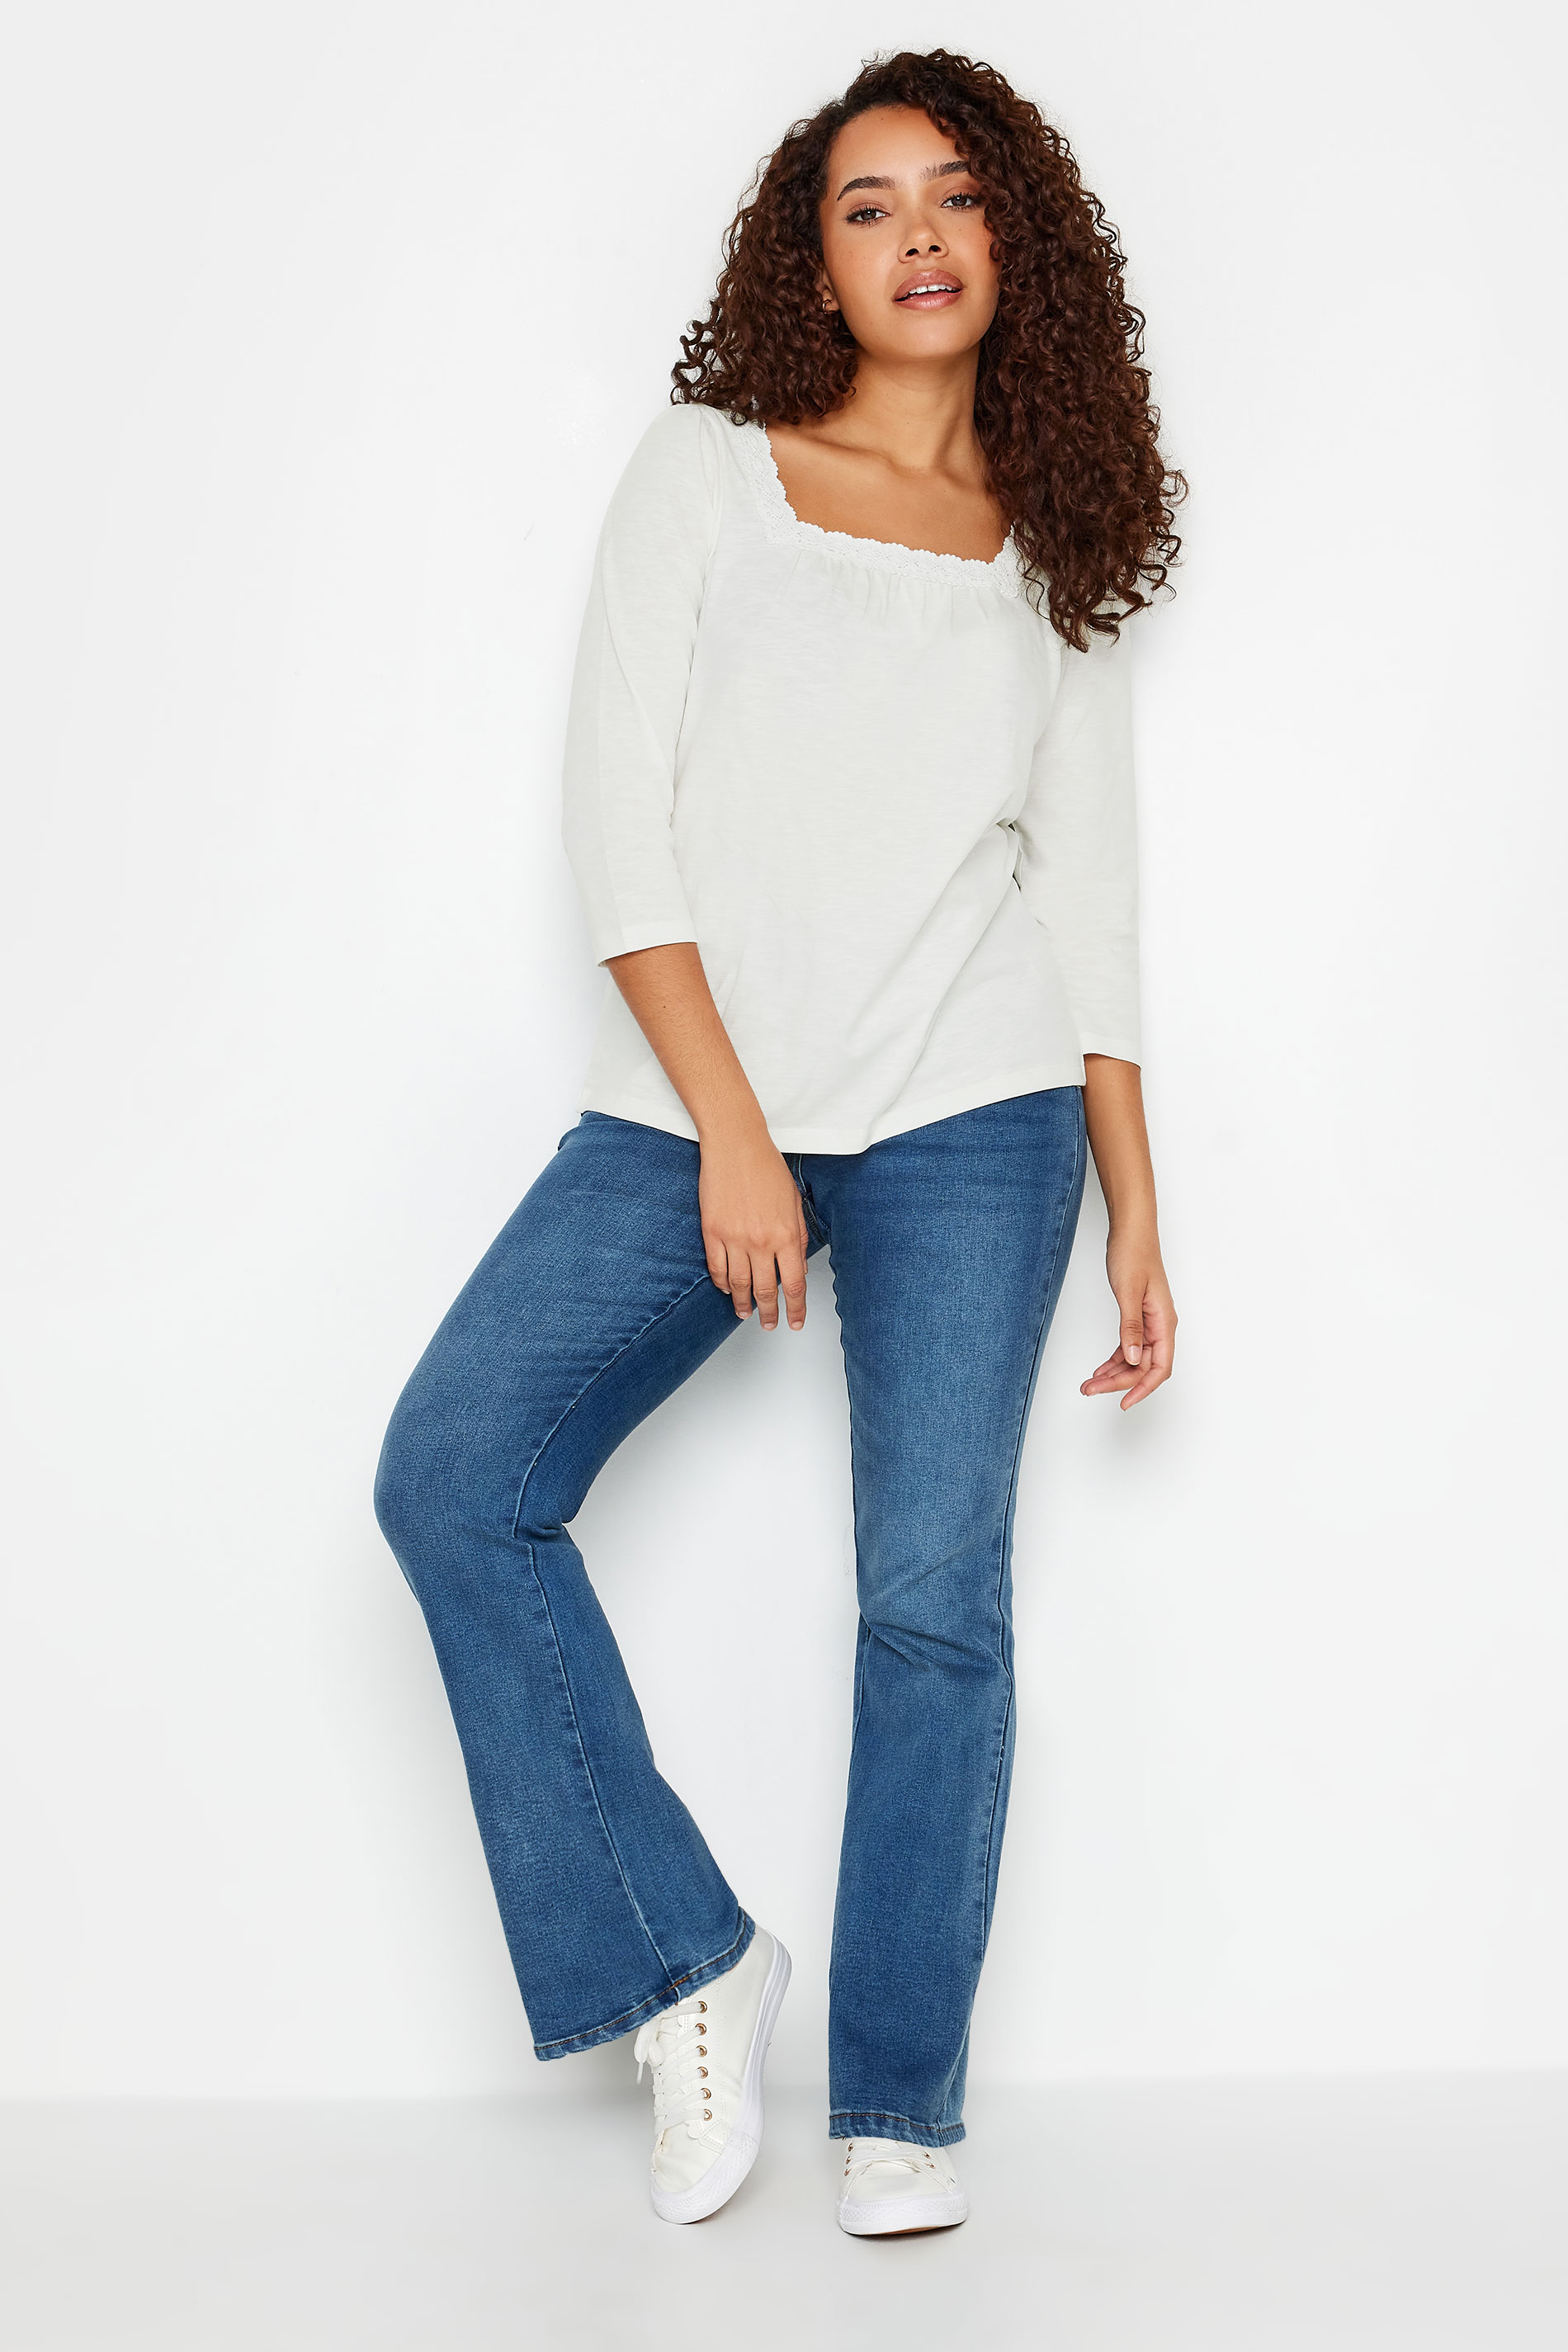 M&Co White Square Neck 3/4 Sleeve Top | M&Co 3